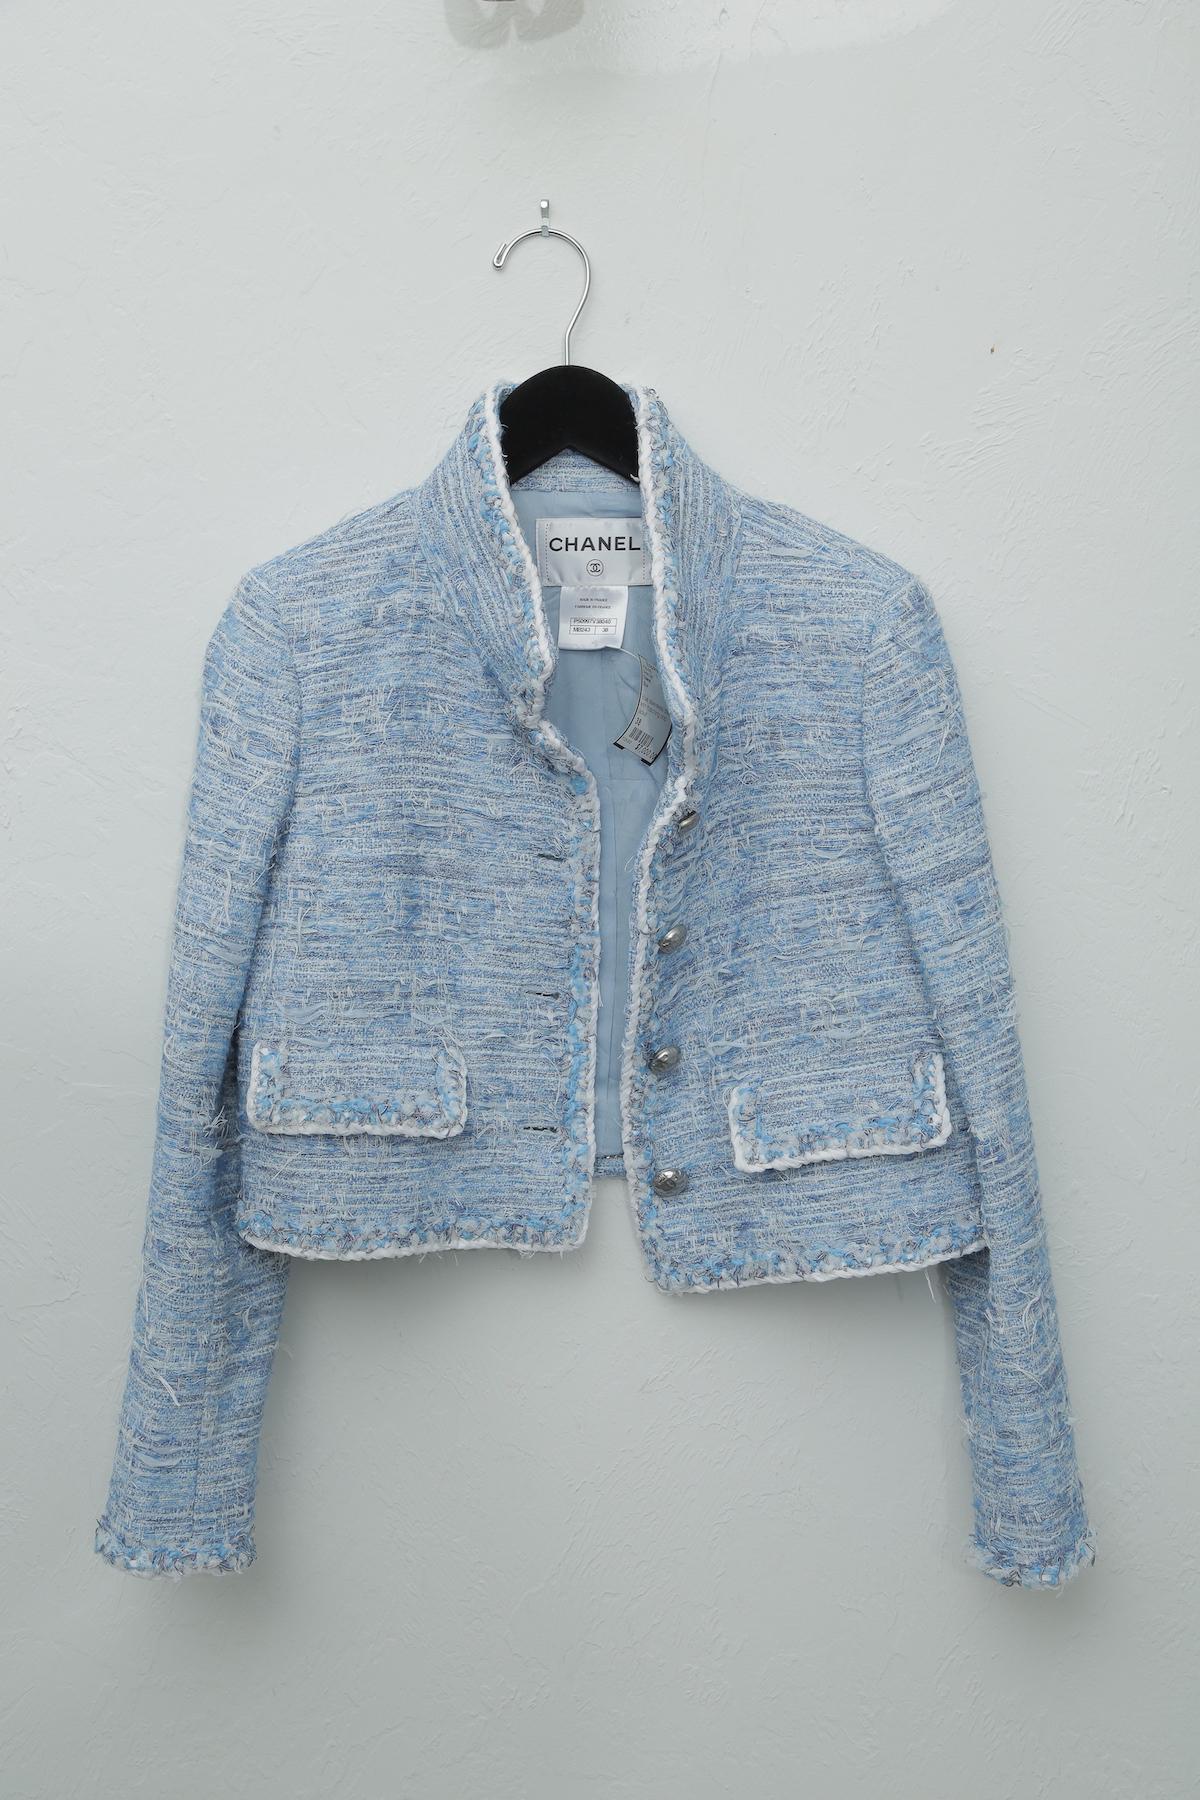 Chanel Blue Baby Tweed with Matching Jacket Cocktail Dress 1